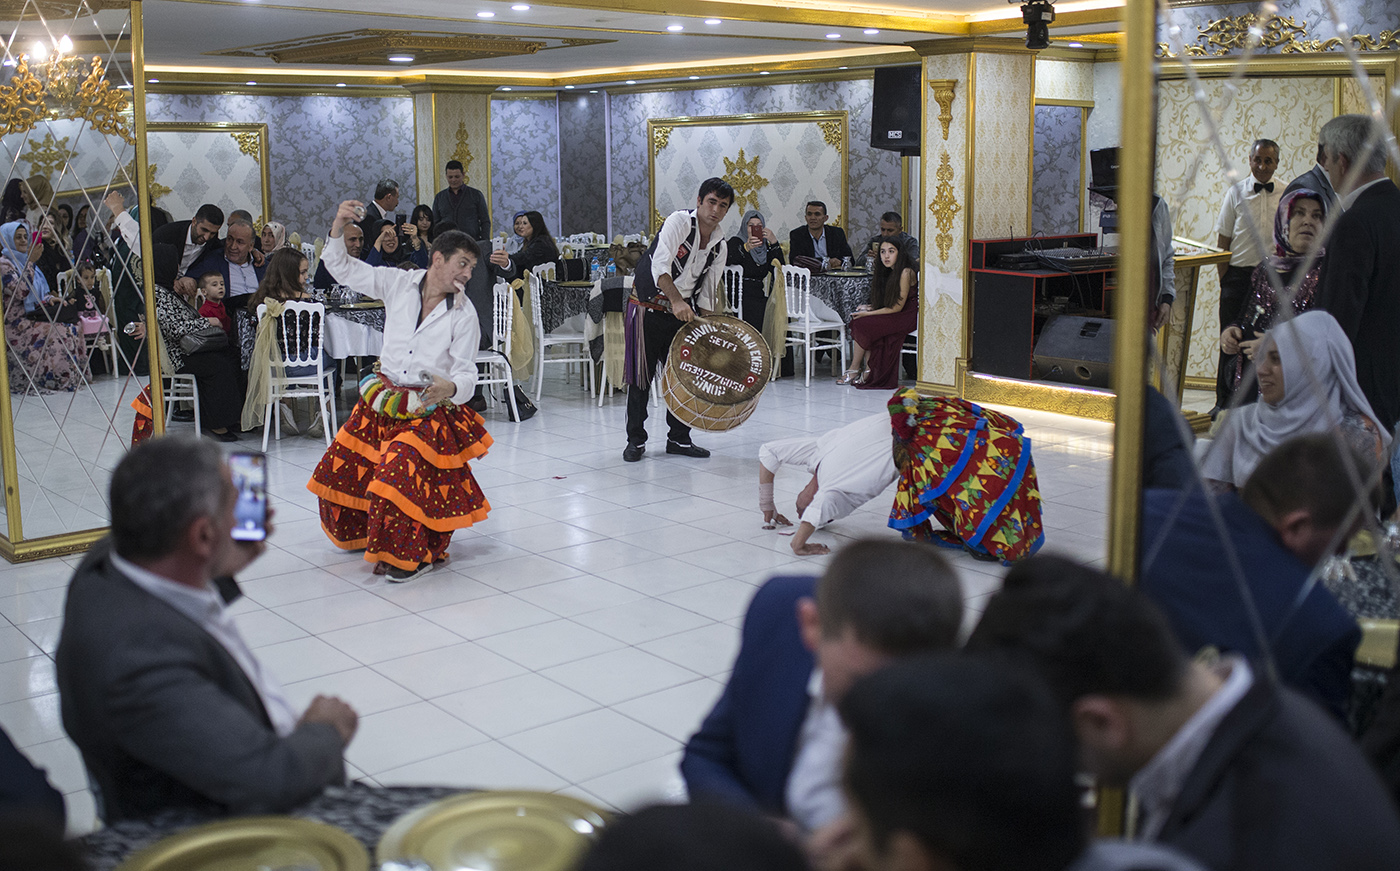 Osman Celik (R) take up money which is thrown by people while dance with his partner during a wedding in Istanbul, Turkey, 16 November 2019. 